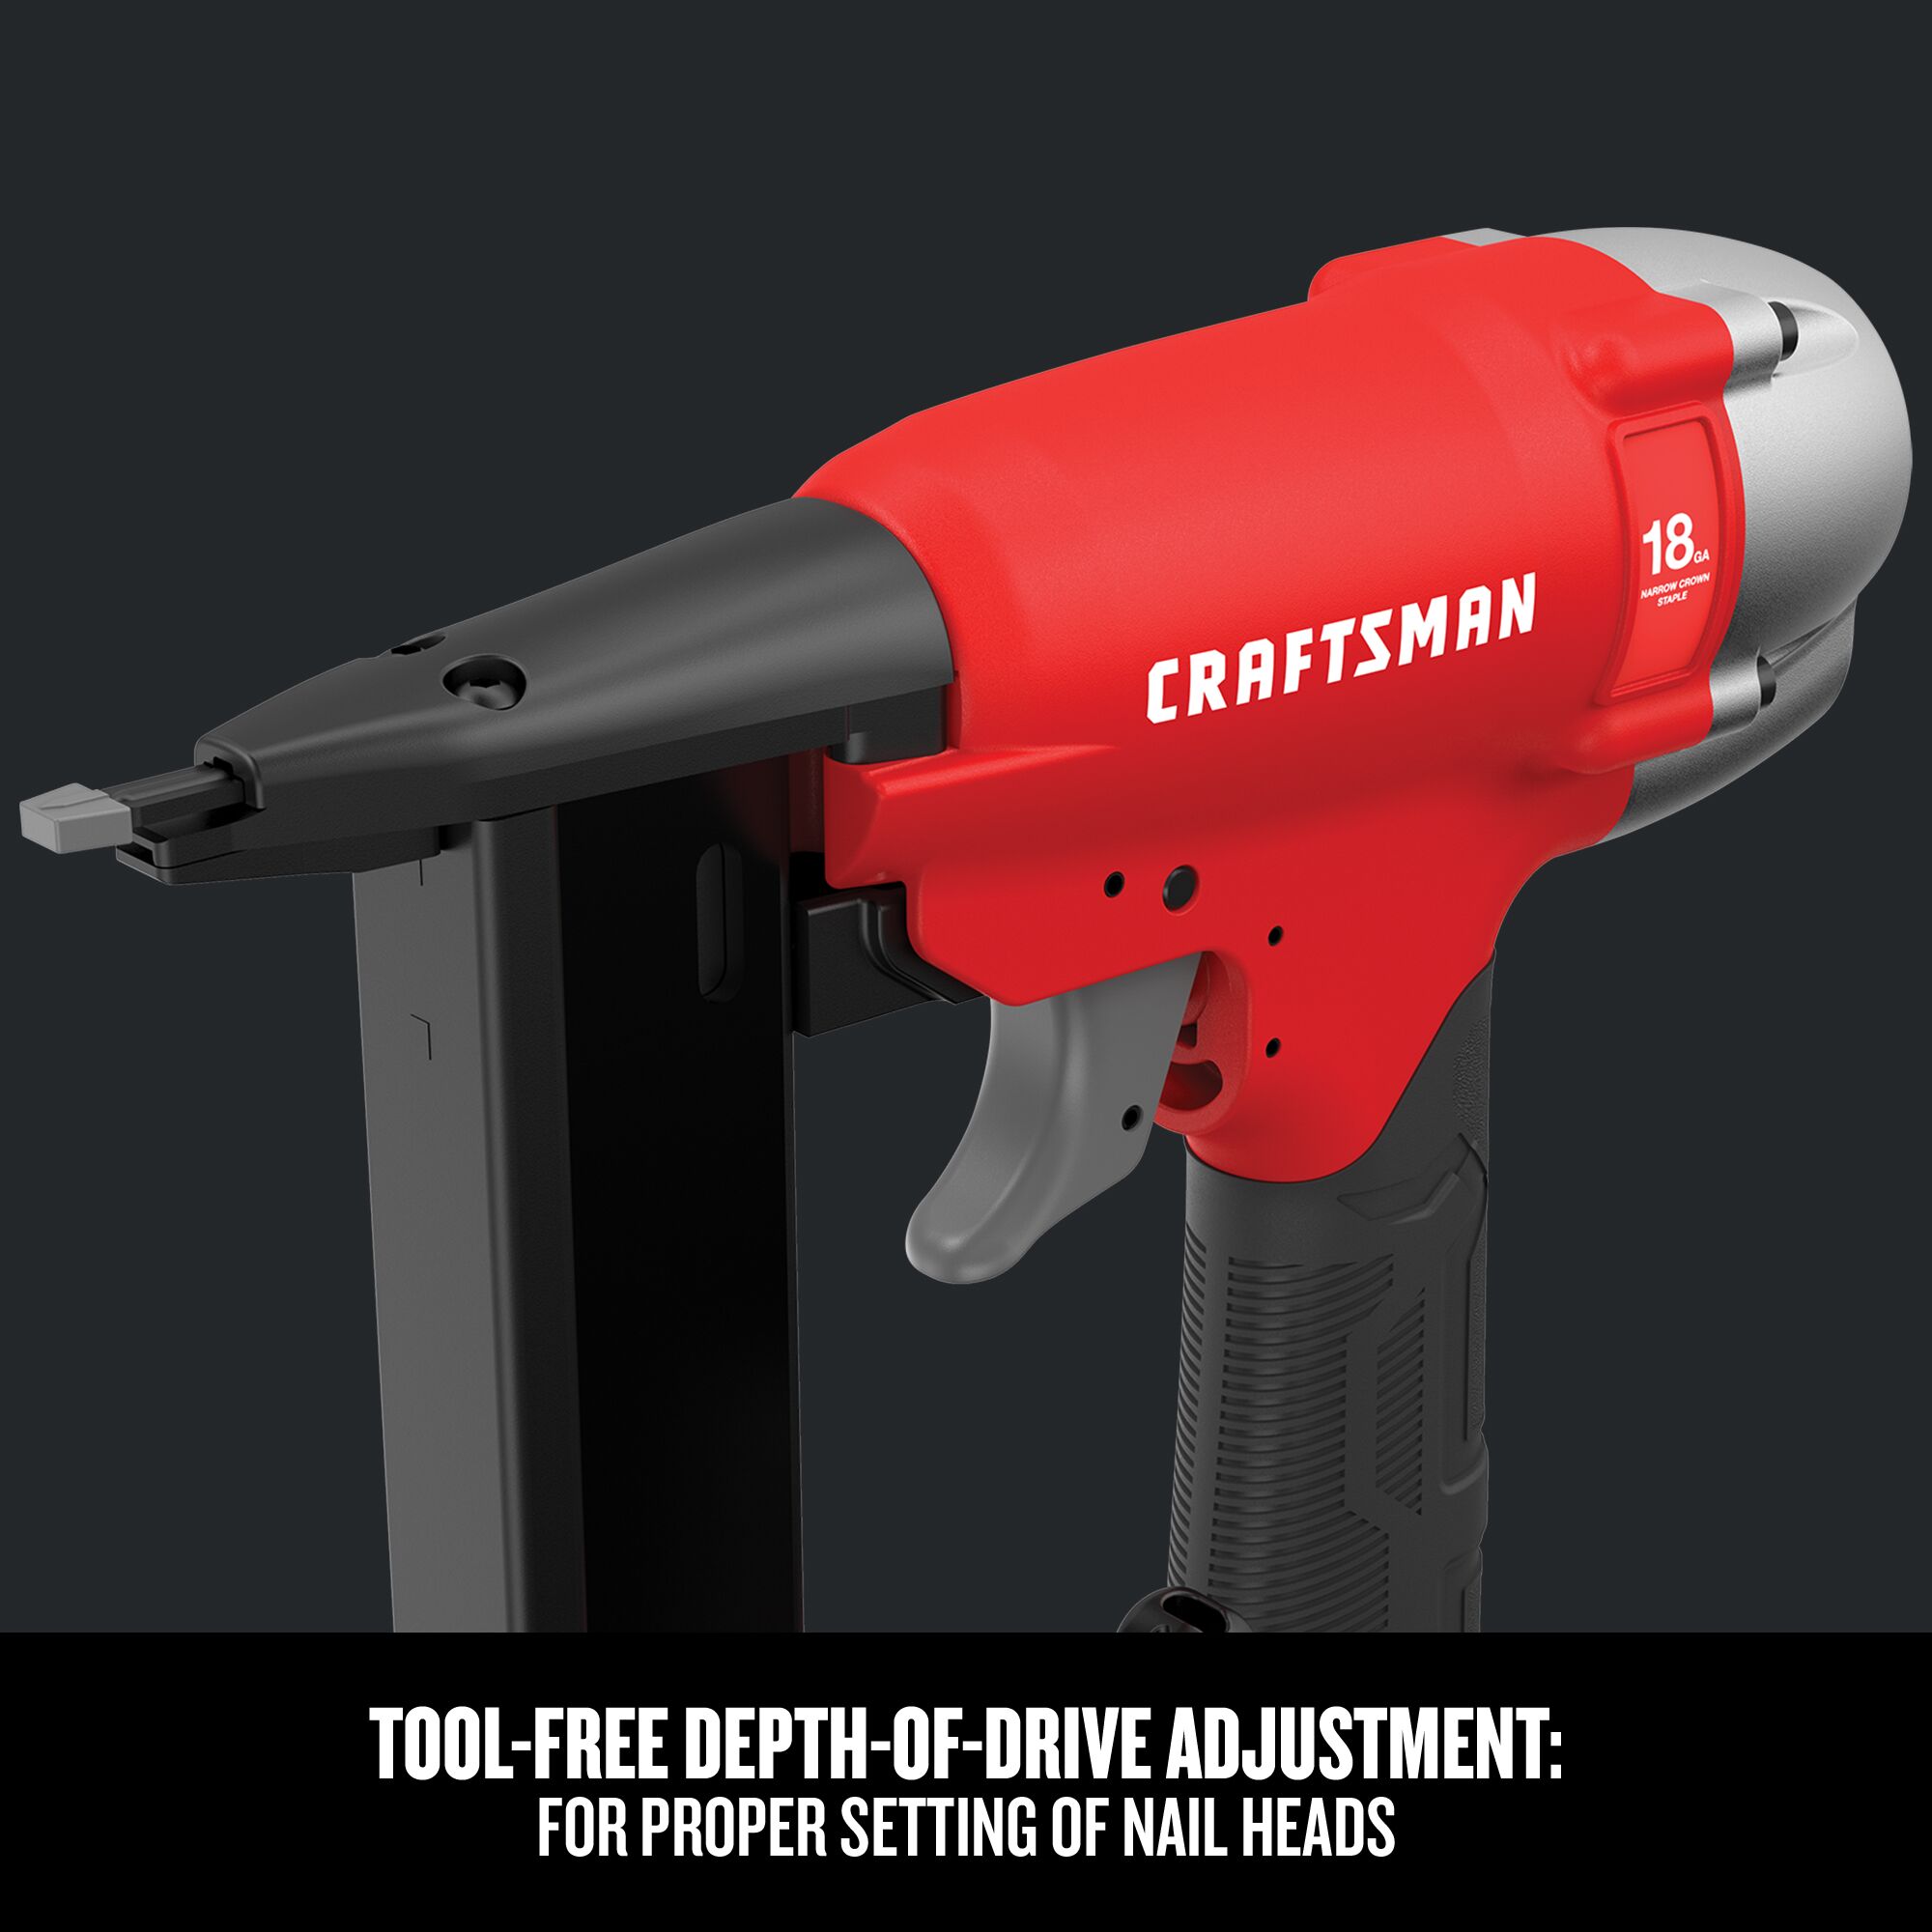 Graphic of CRAFTSMAN Stapler: Narrow Crown highlighting product features